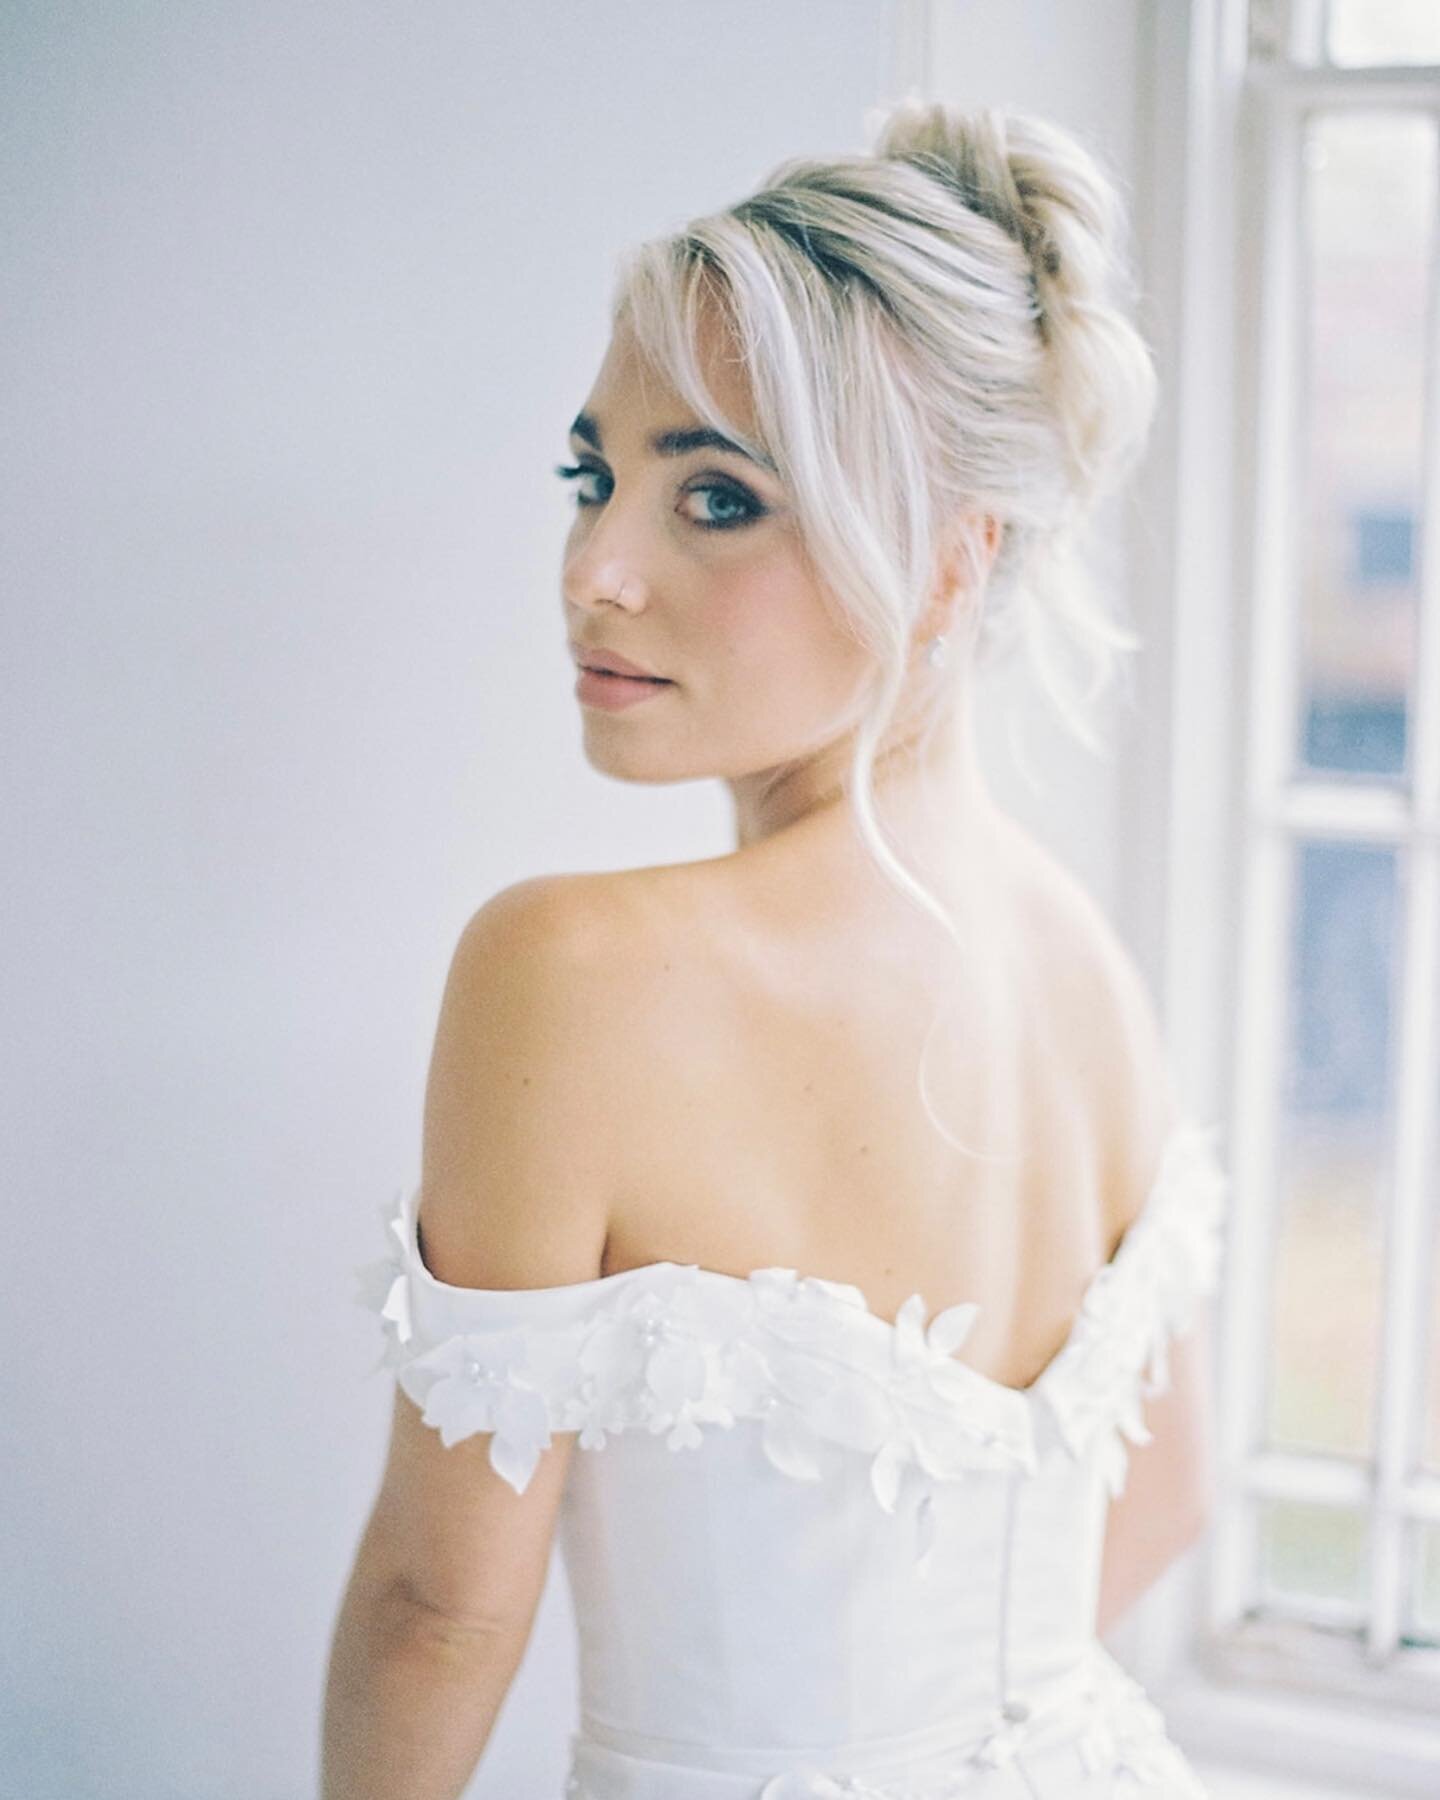 SNEAK PEAK // This updo is proving to be really popular and on trend for our 2024 brides, which is why it has made it into our recent campaign shoot! 
-
-
Creative Hair Director: Bethany 
Creative Makeup Director: Sarah 
Photographer: @camillajoyphot